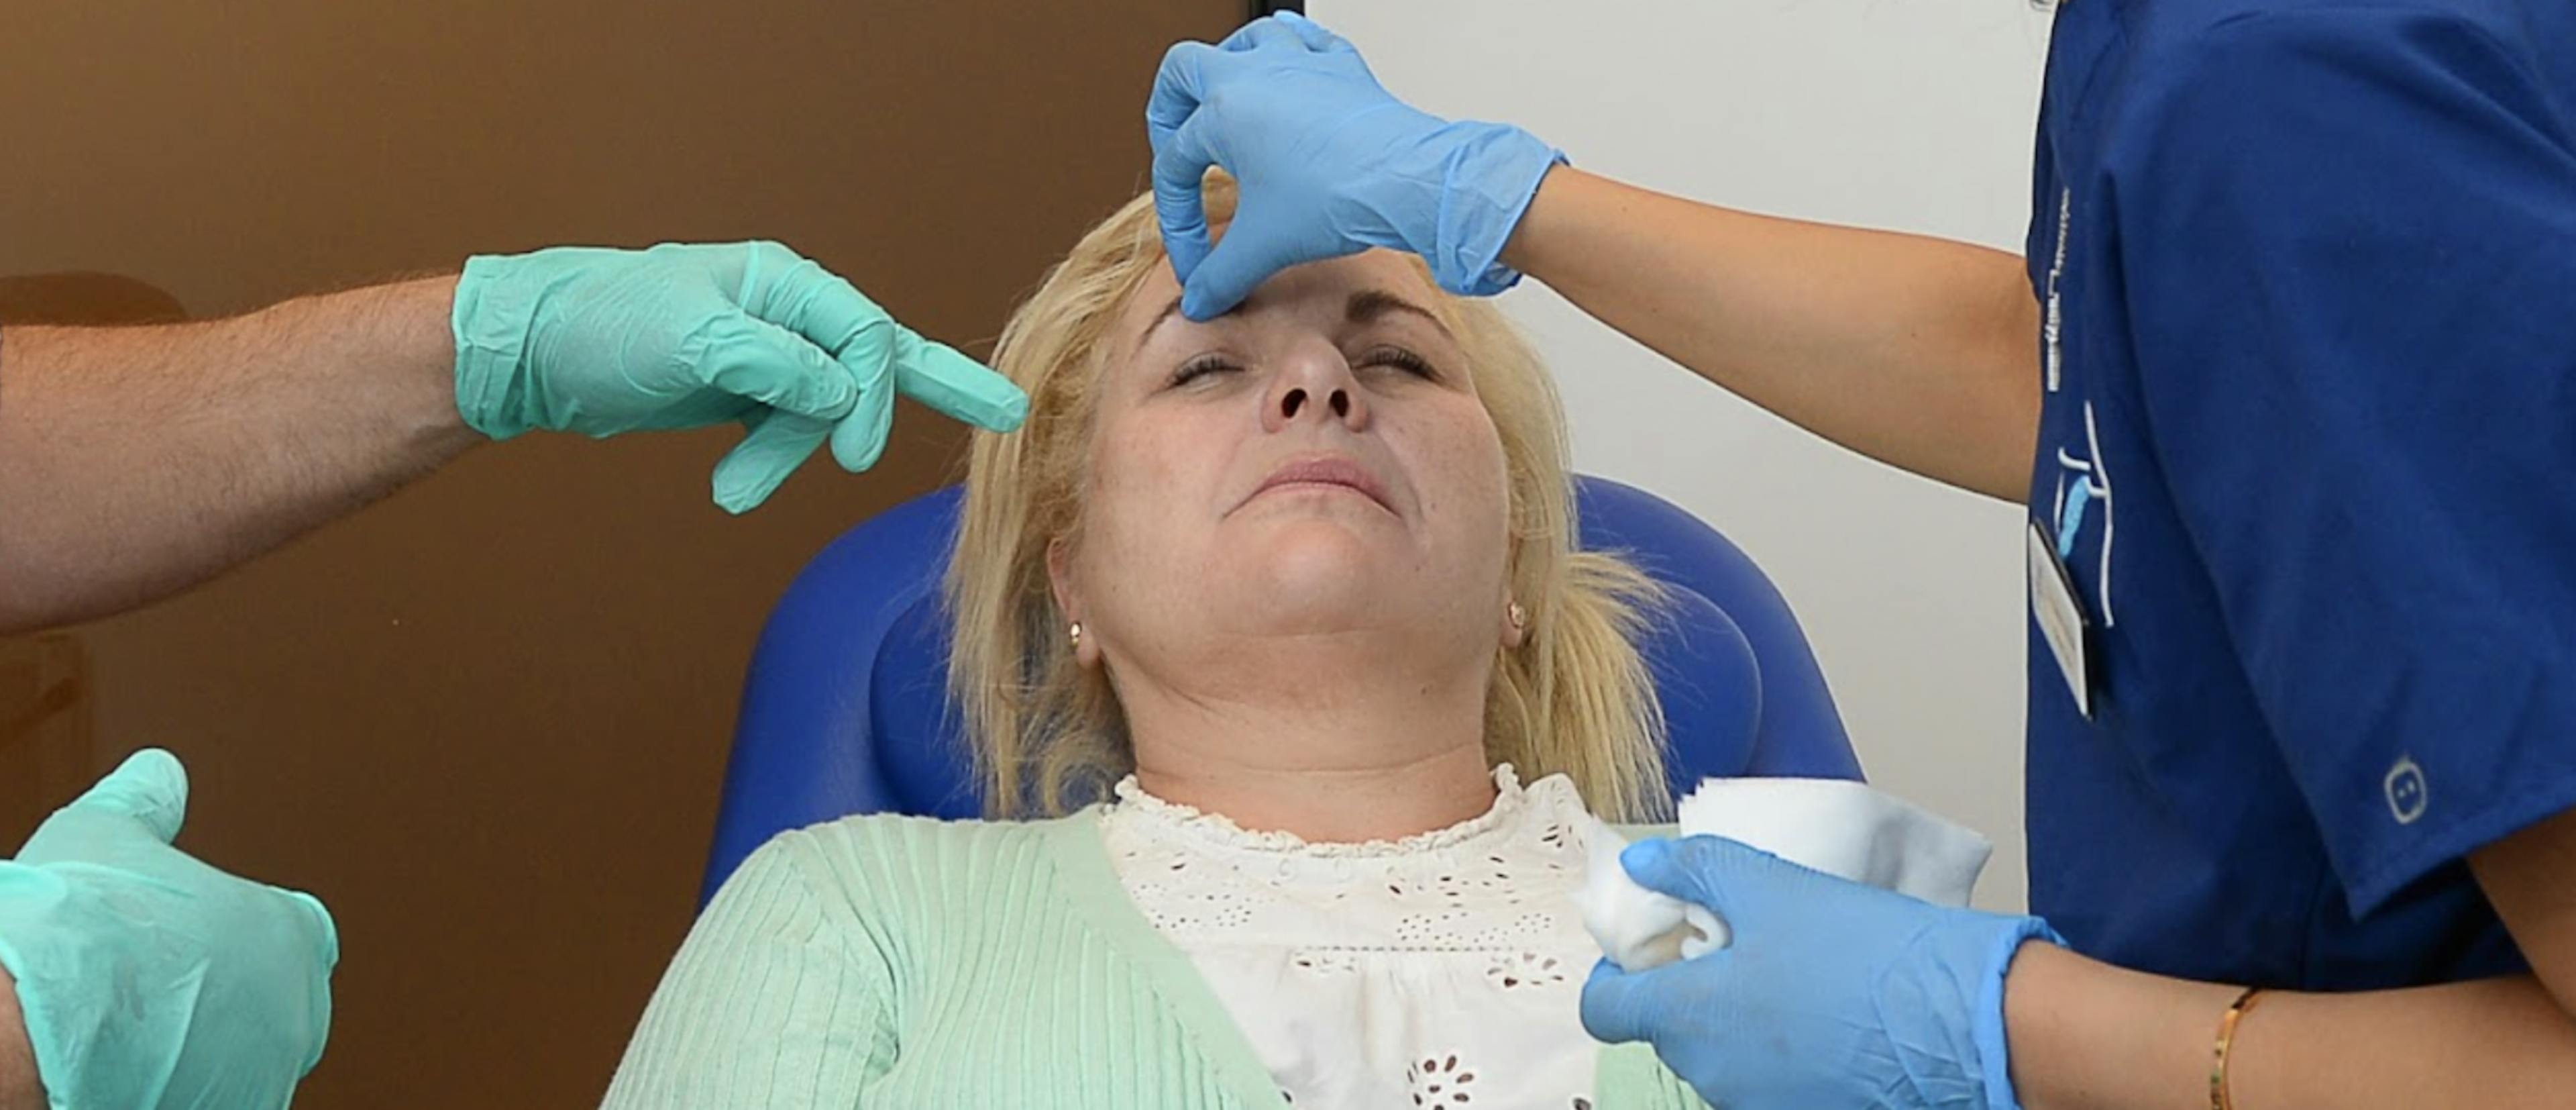 Correcting asymmetry cosmetic injectables training